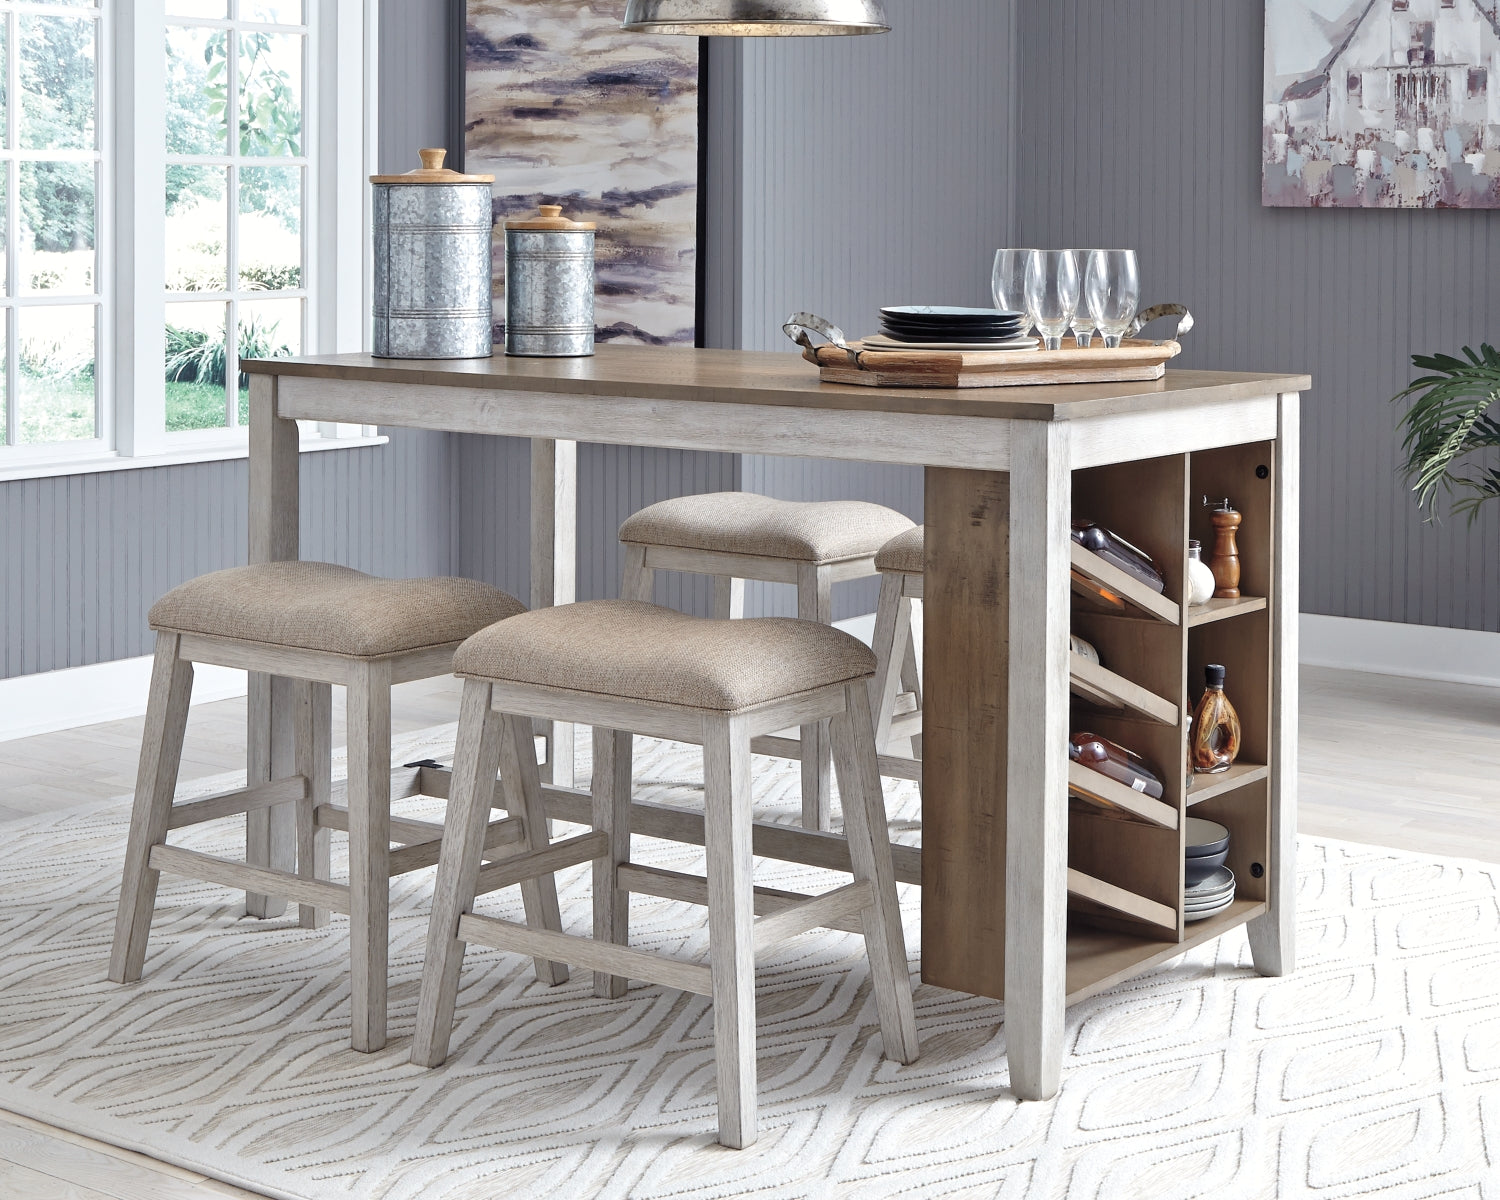 Skempton Counter Height Dining Table and 4 Barstools